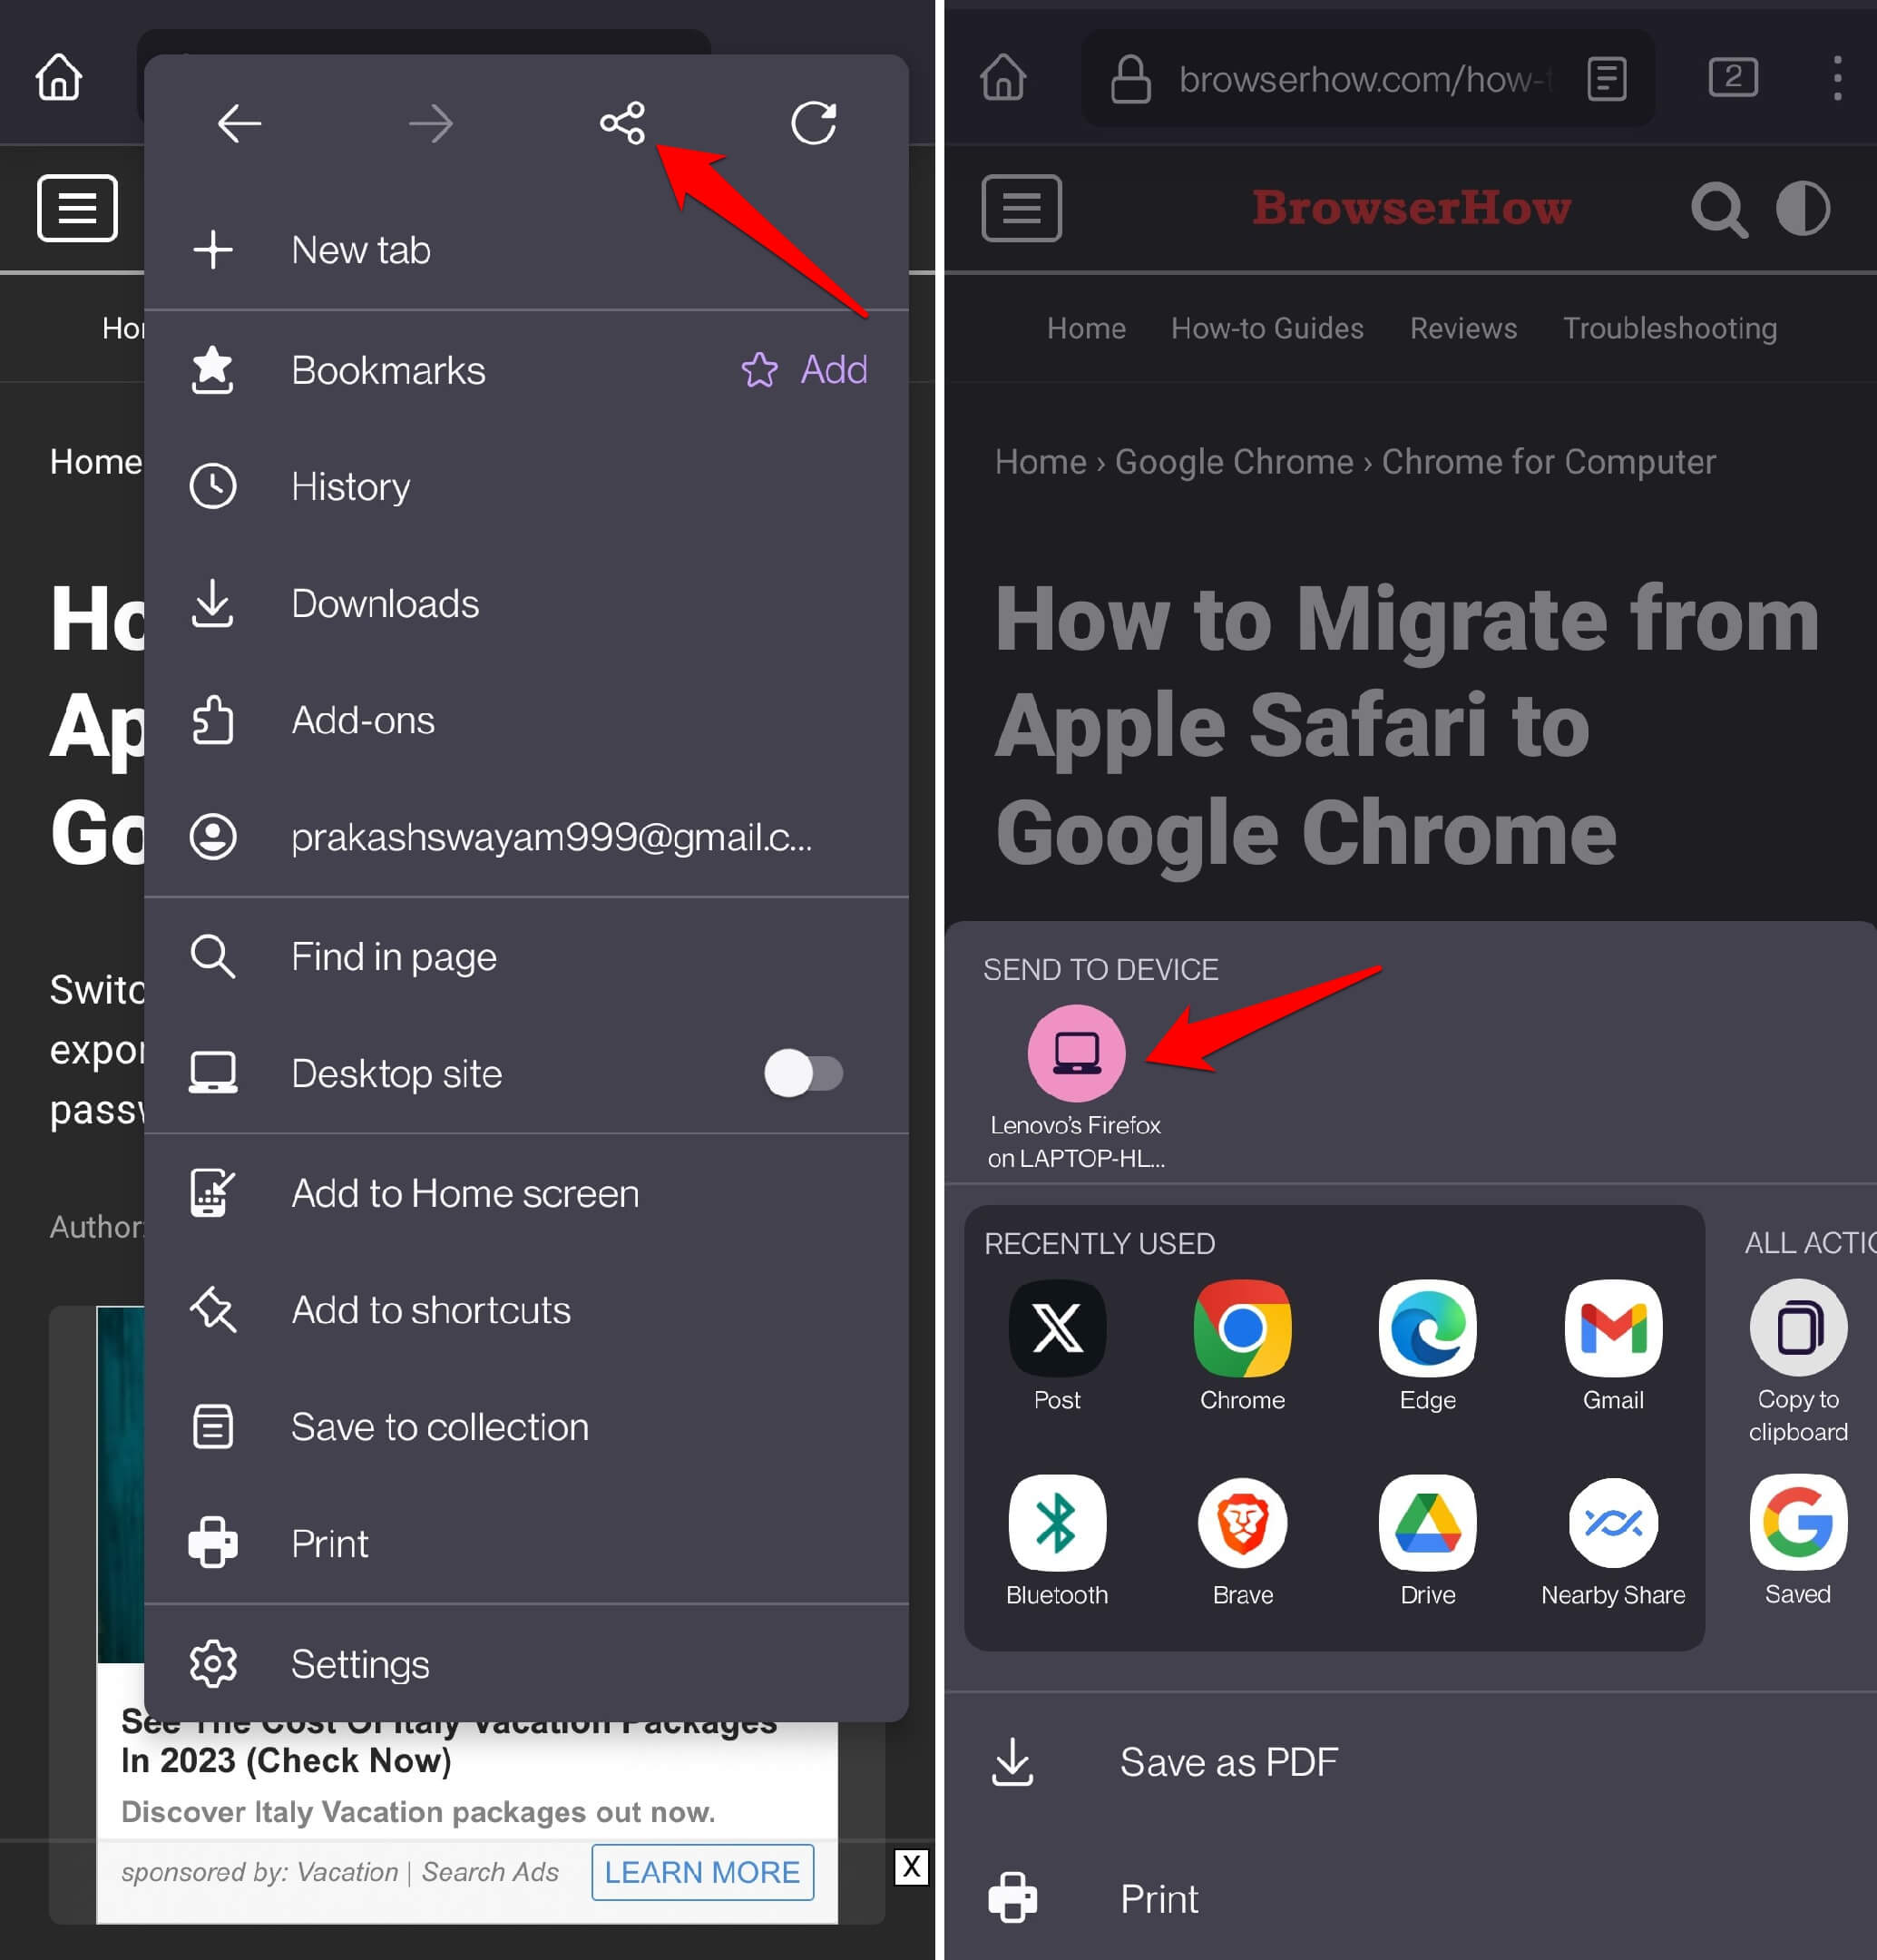 send link to a device in Firefox for Android